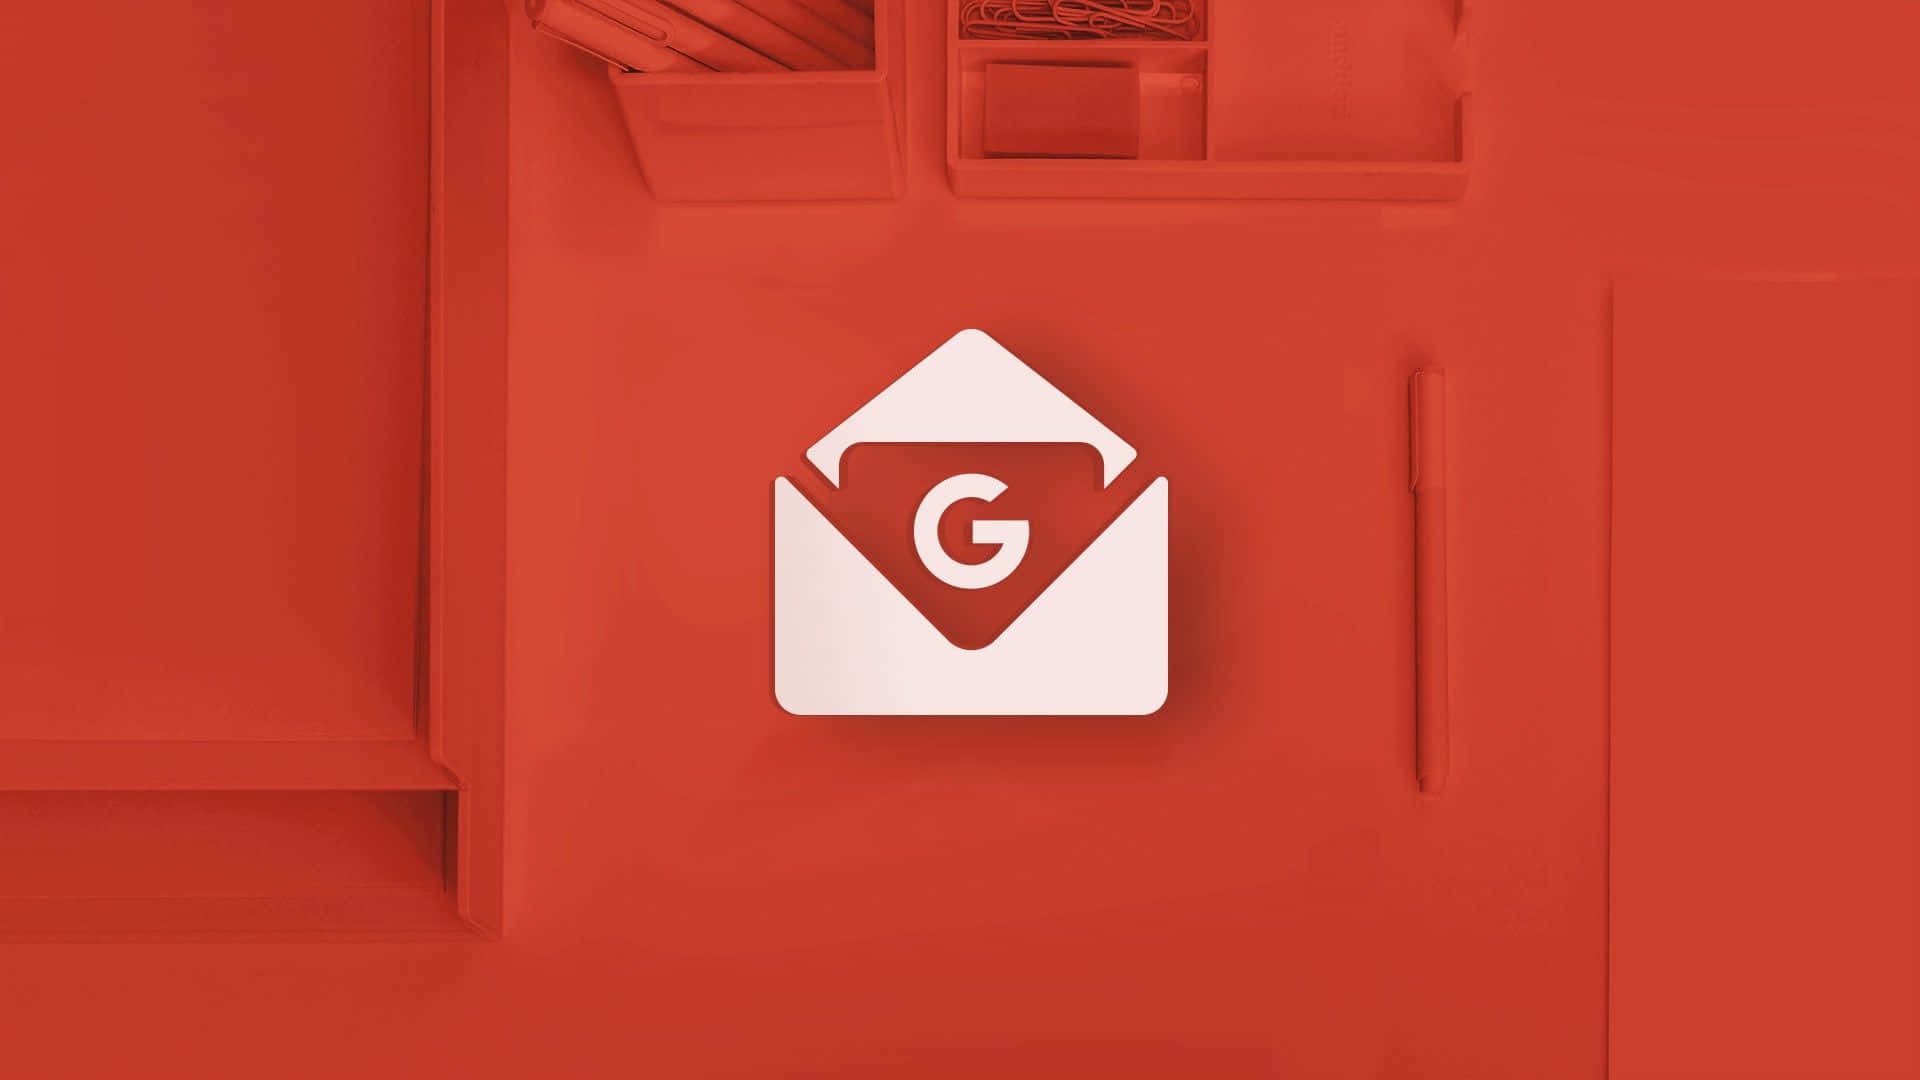 Gmail- Connecting the world through emails